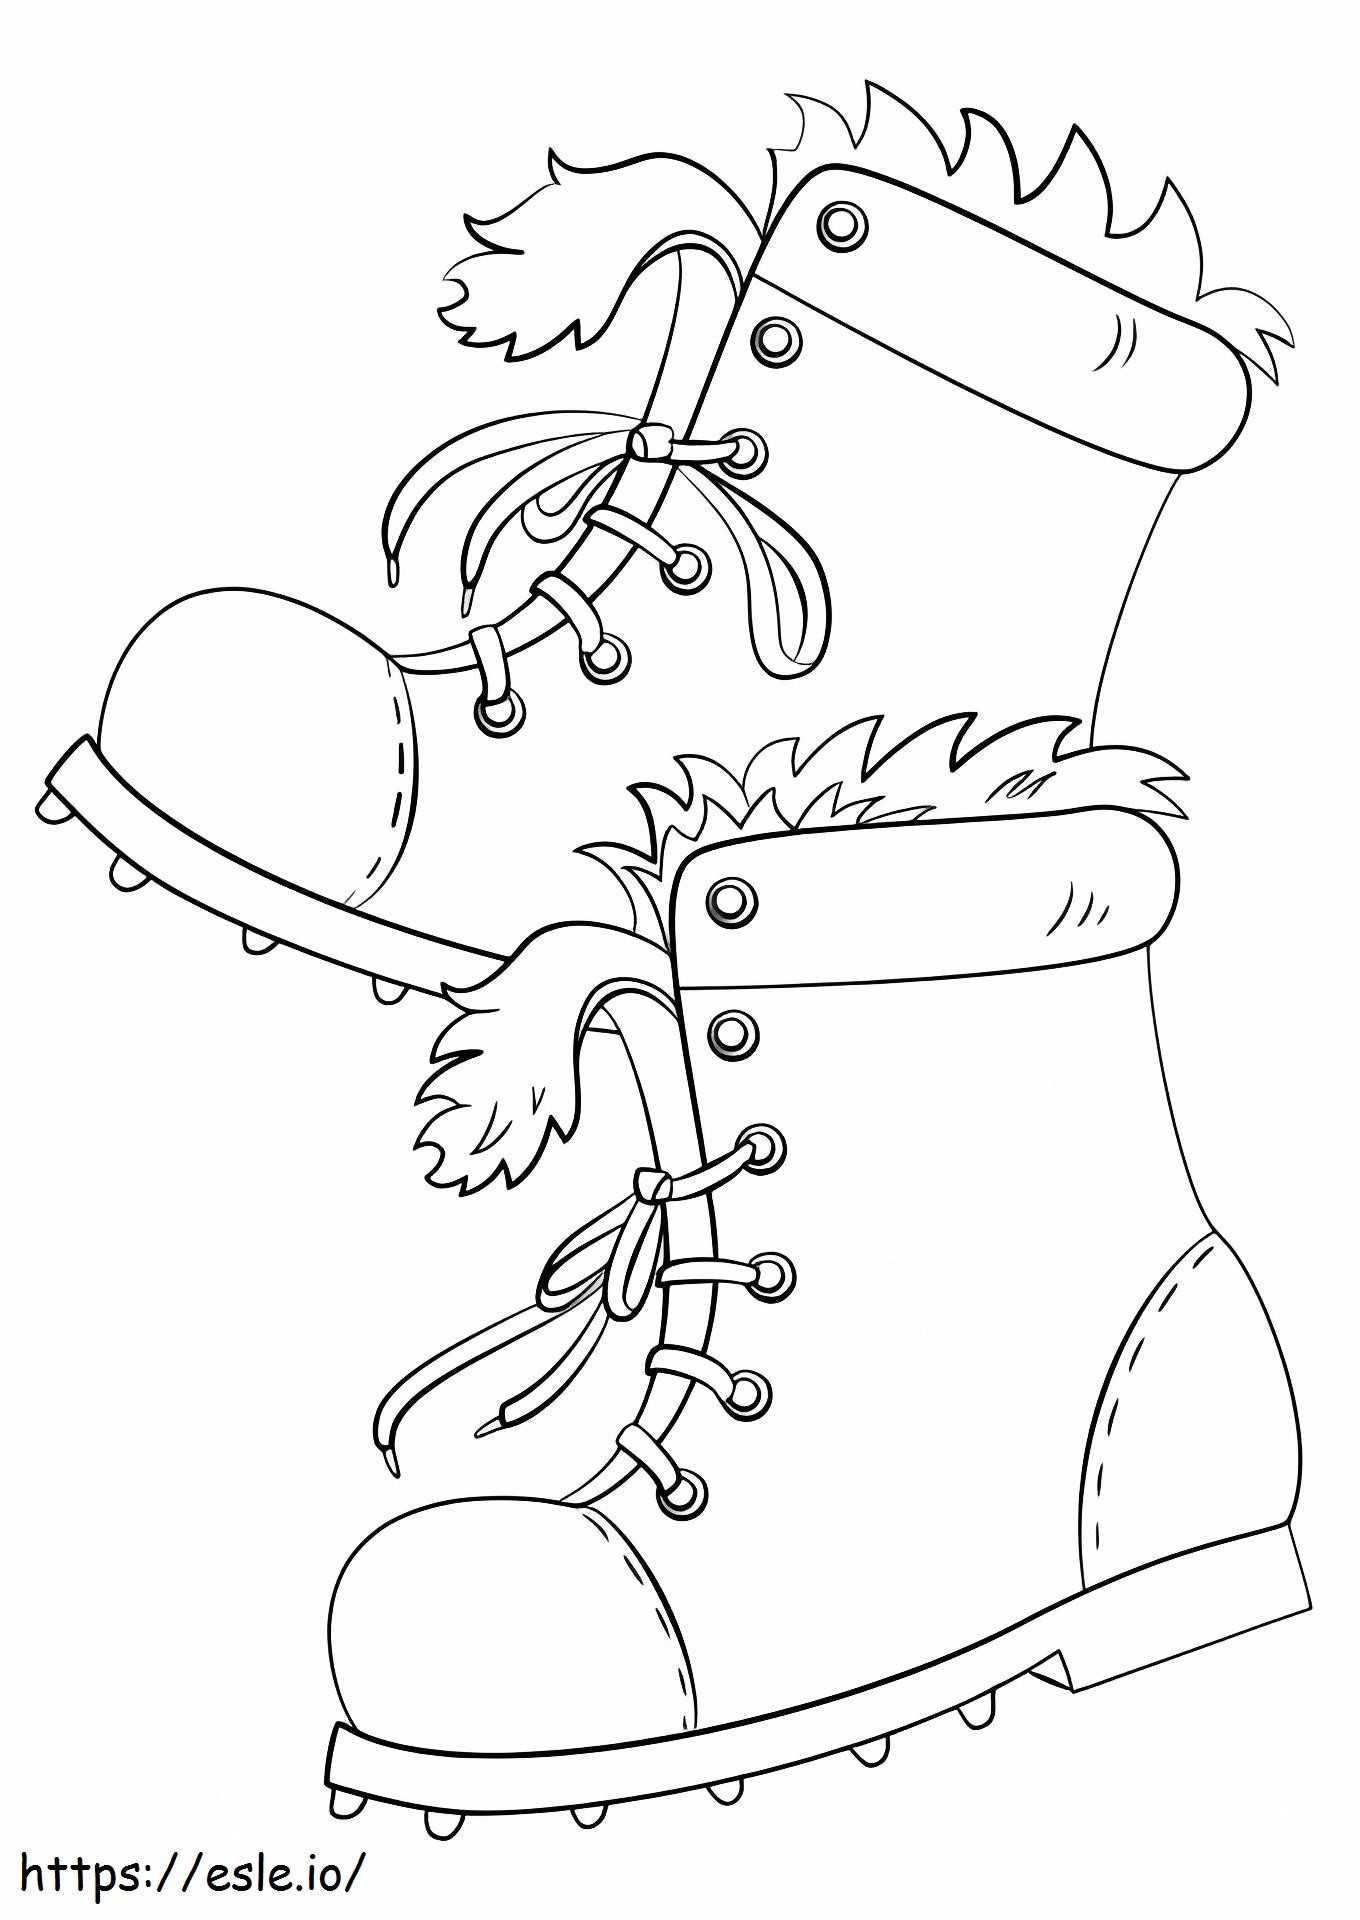 Winter Boots coloring page